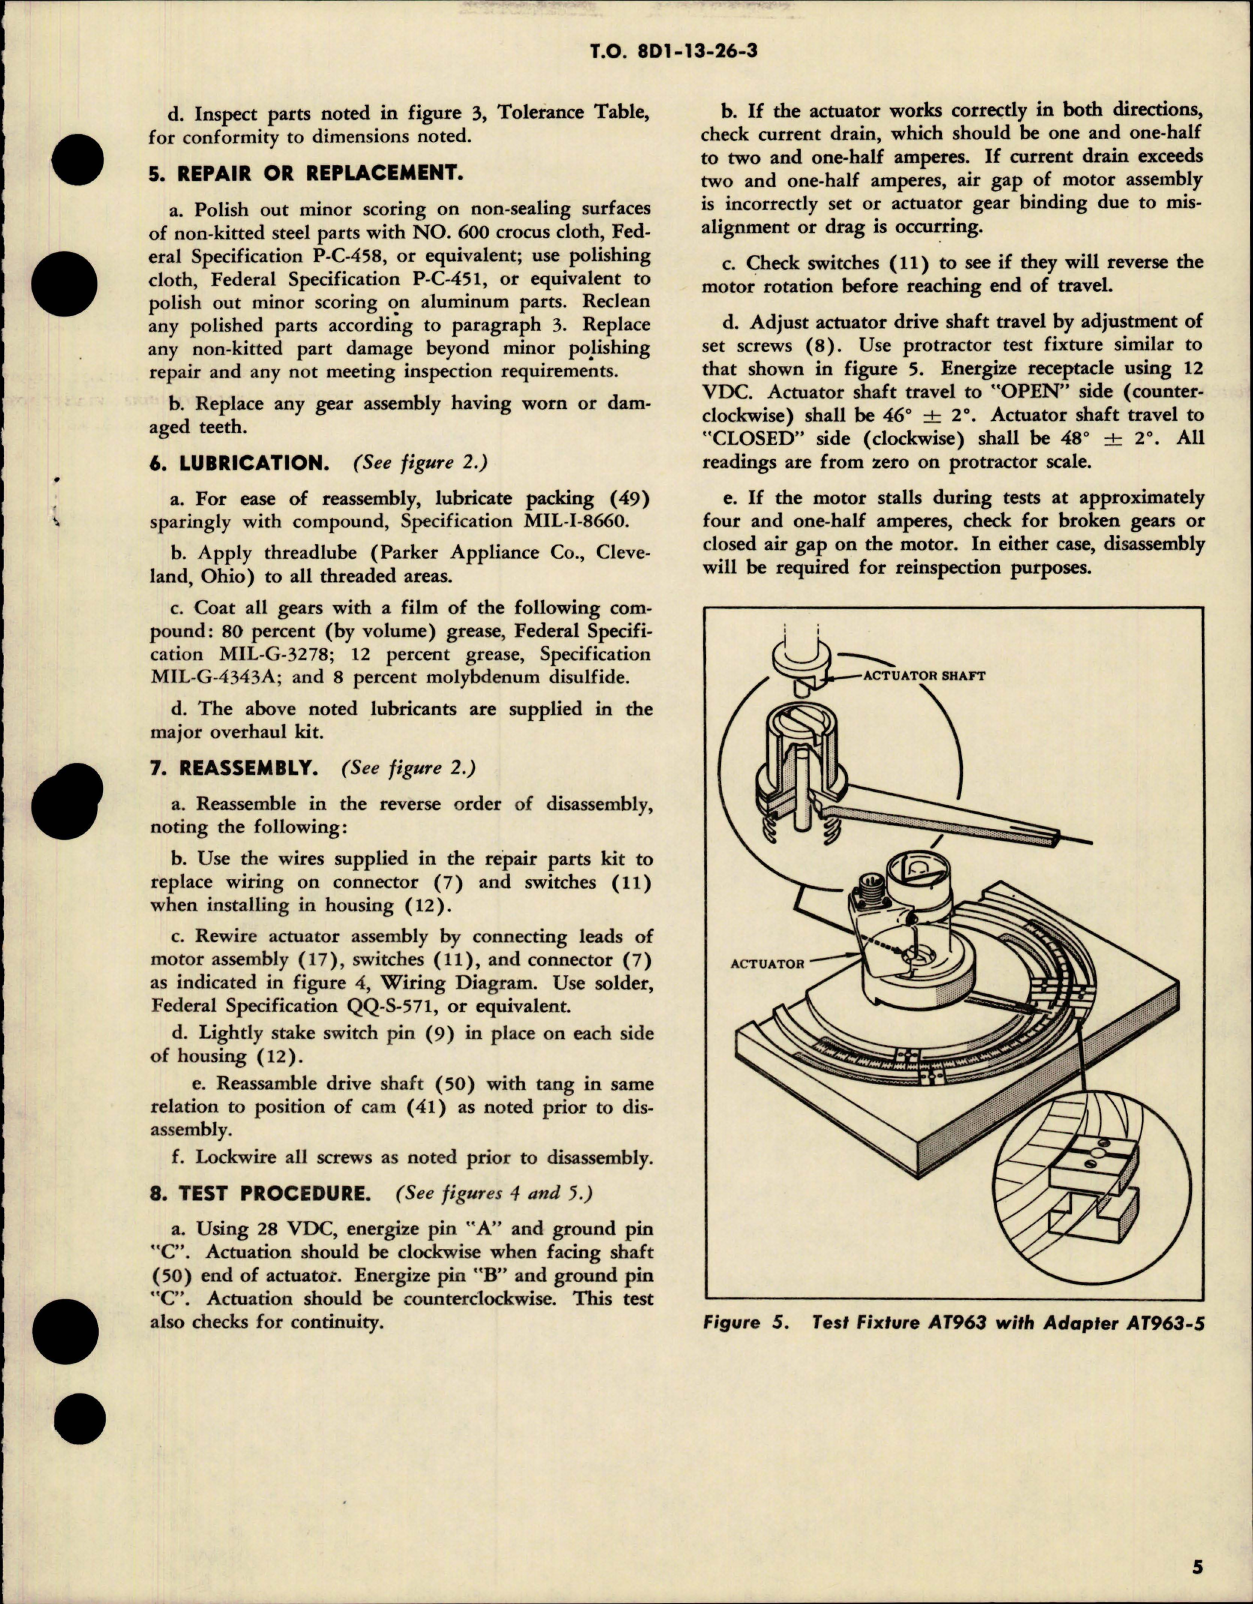 Sample page 5 from AirCorps Library document: Overhaul with Parts Breakdown for Series Motor Actuator Assembly- Part 109397 